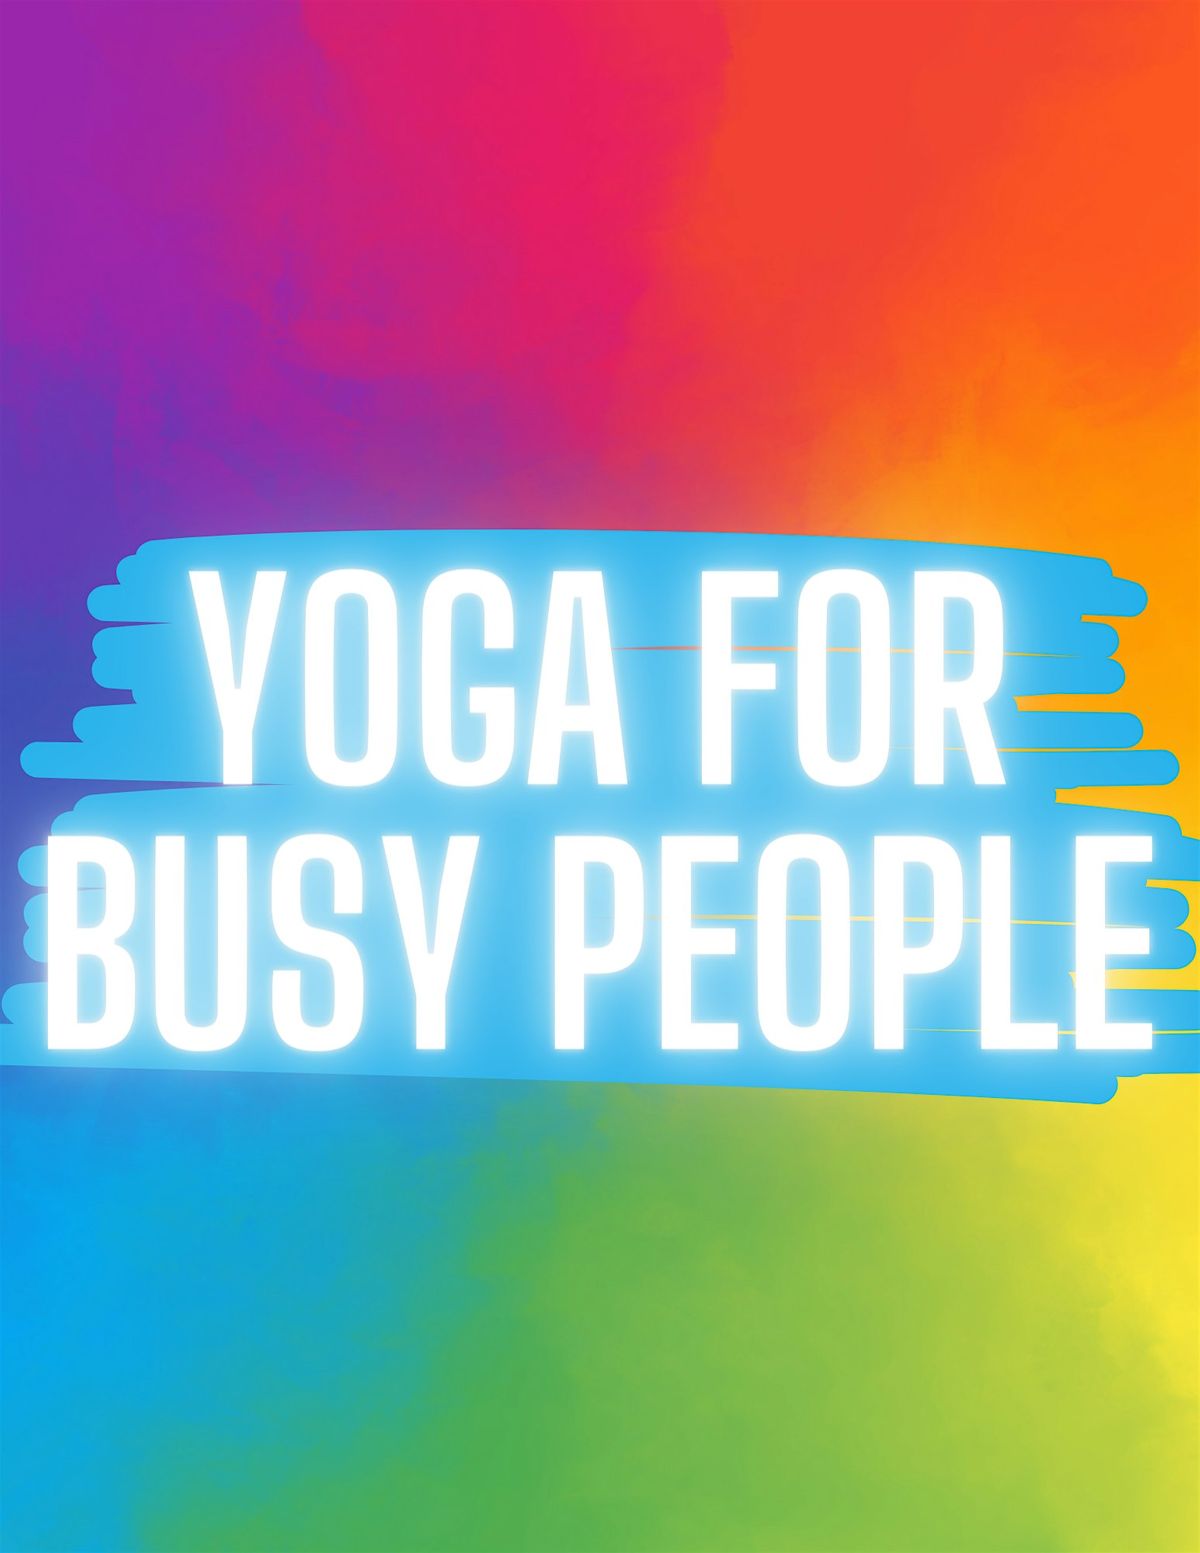 Yoga for Busy People - Weekly Yoga Class - Miami